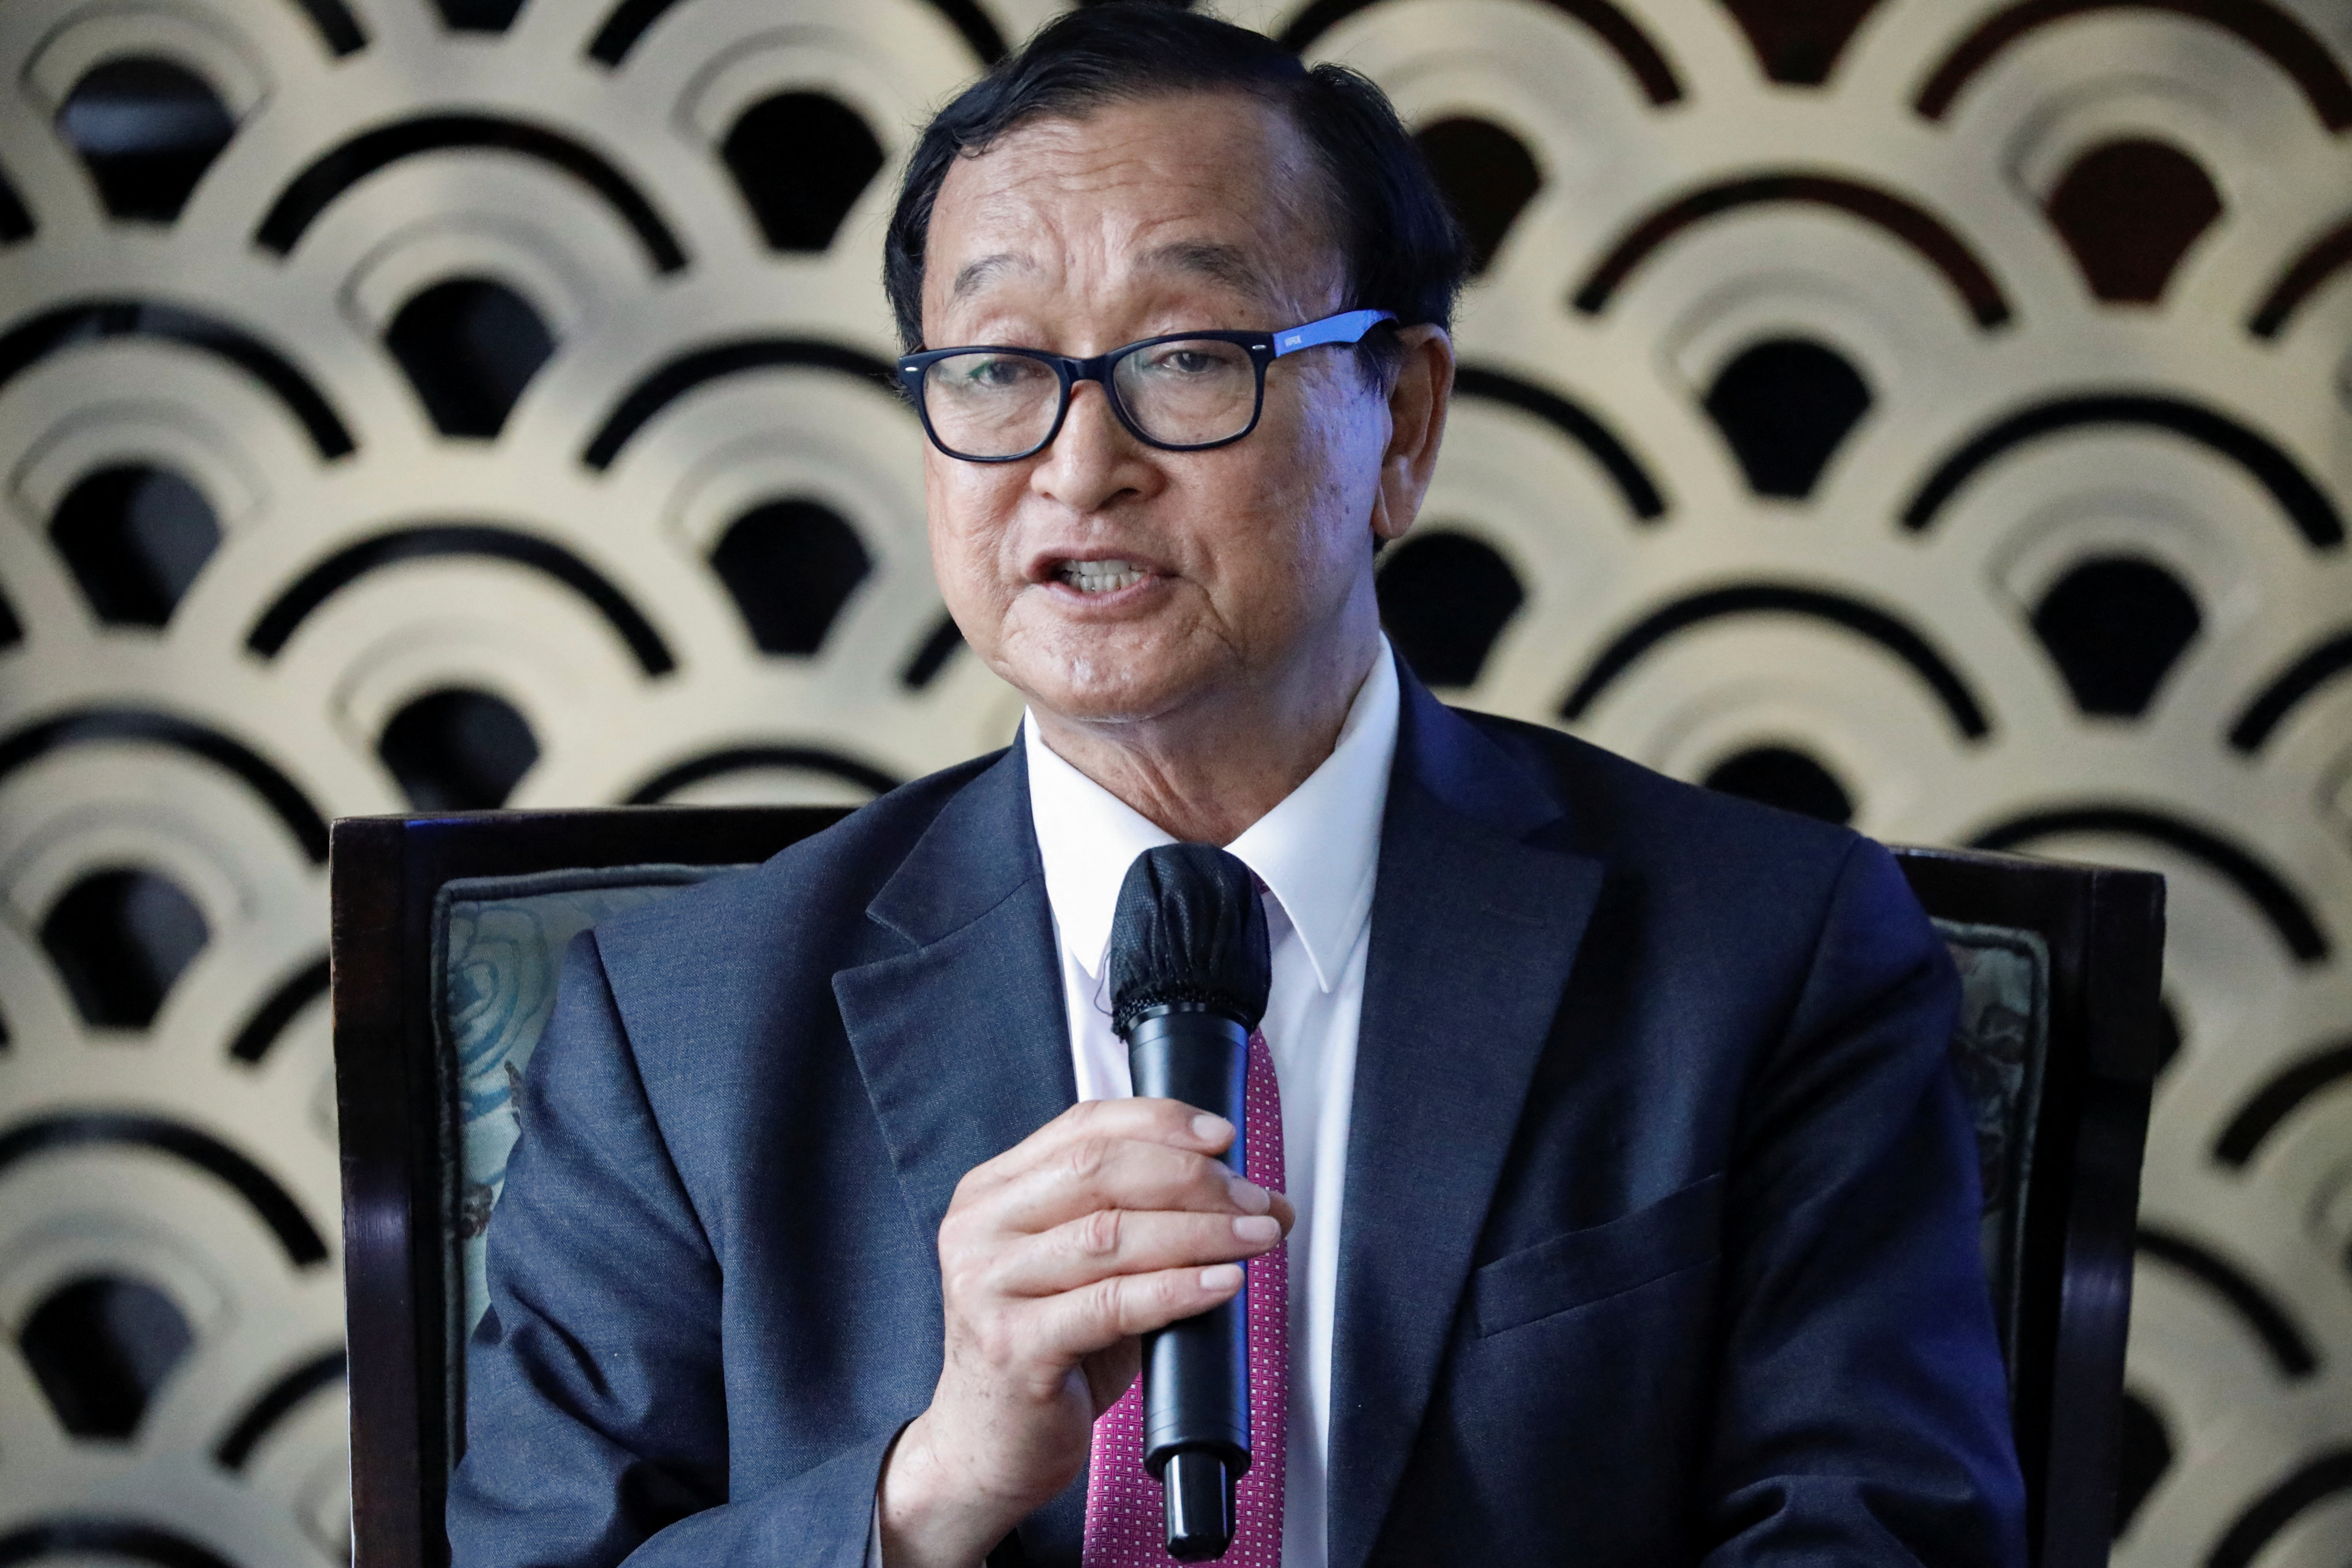 Cambodian opposition figure Sam Rainsy speaks during a press freedom event in Jakarta